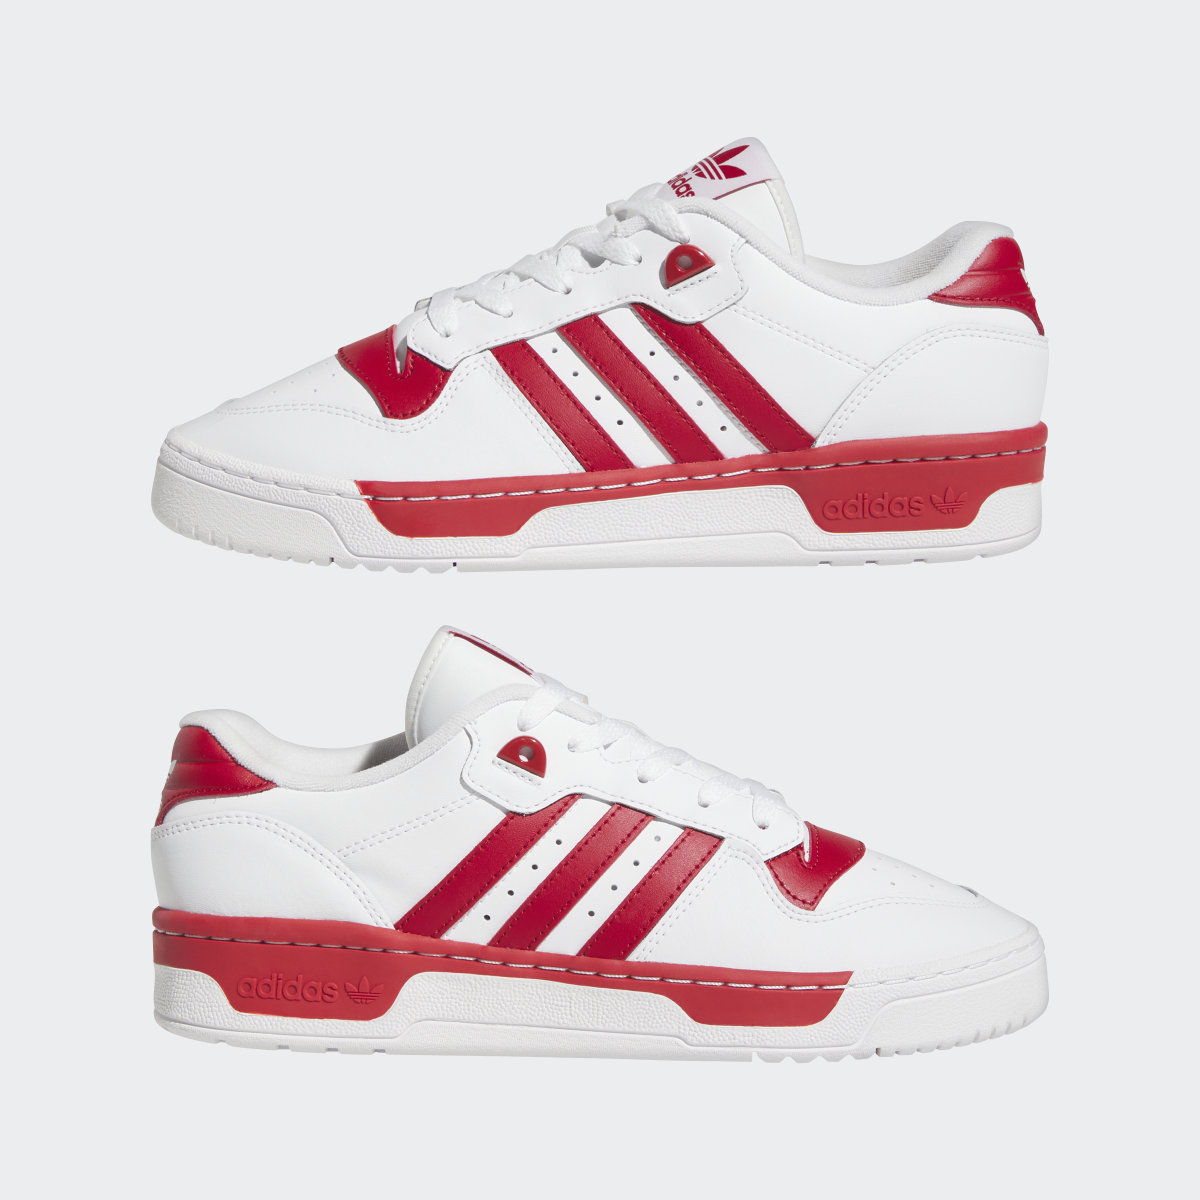 Adidas Rivalry Low Shoes. 11